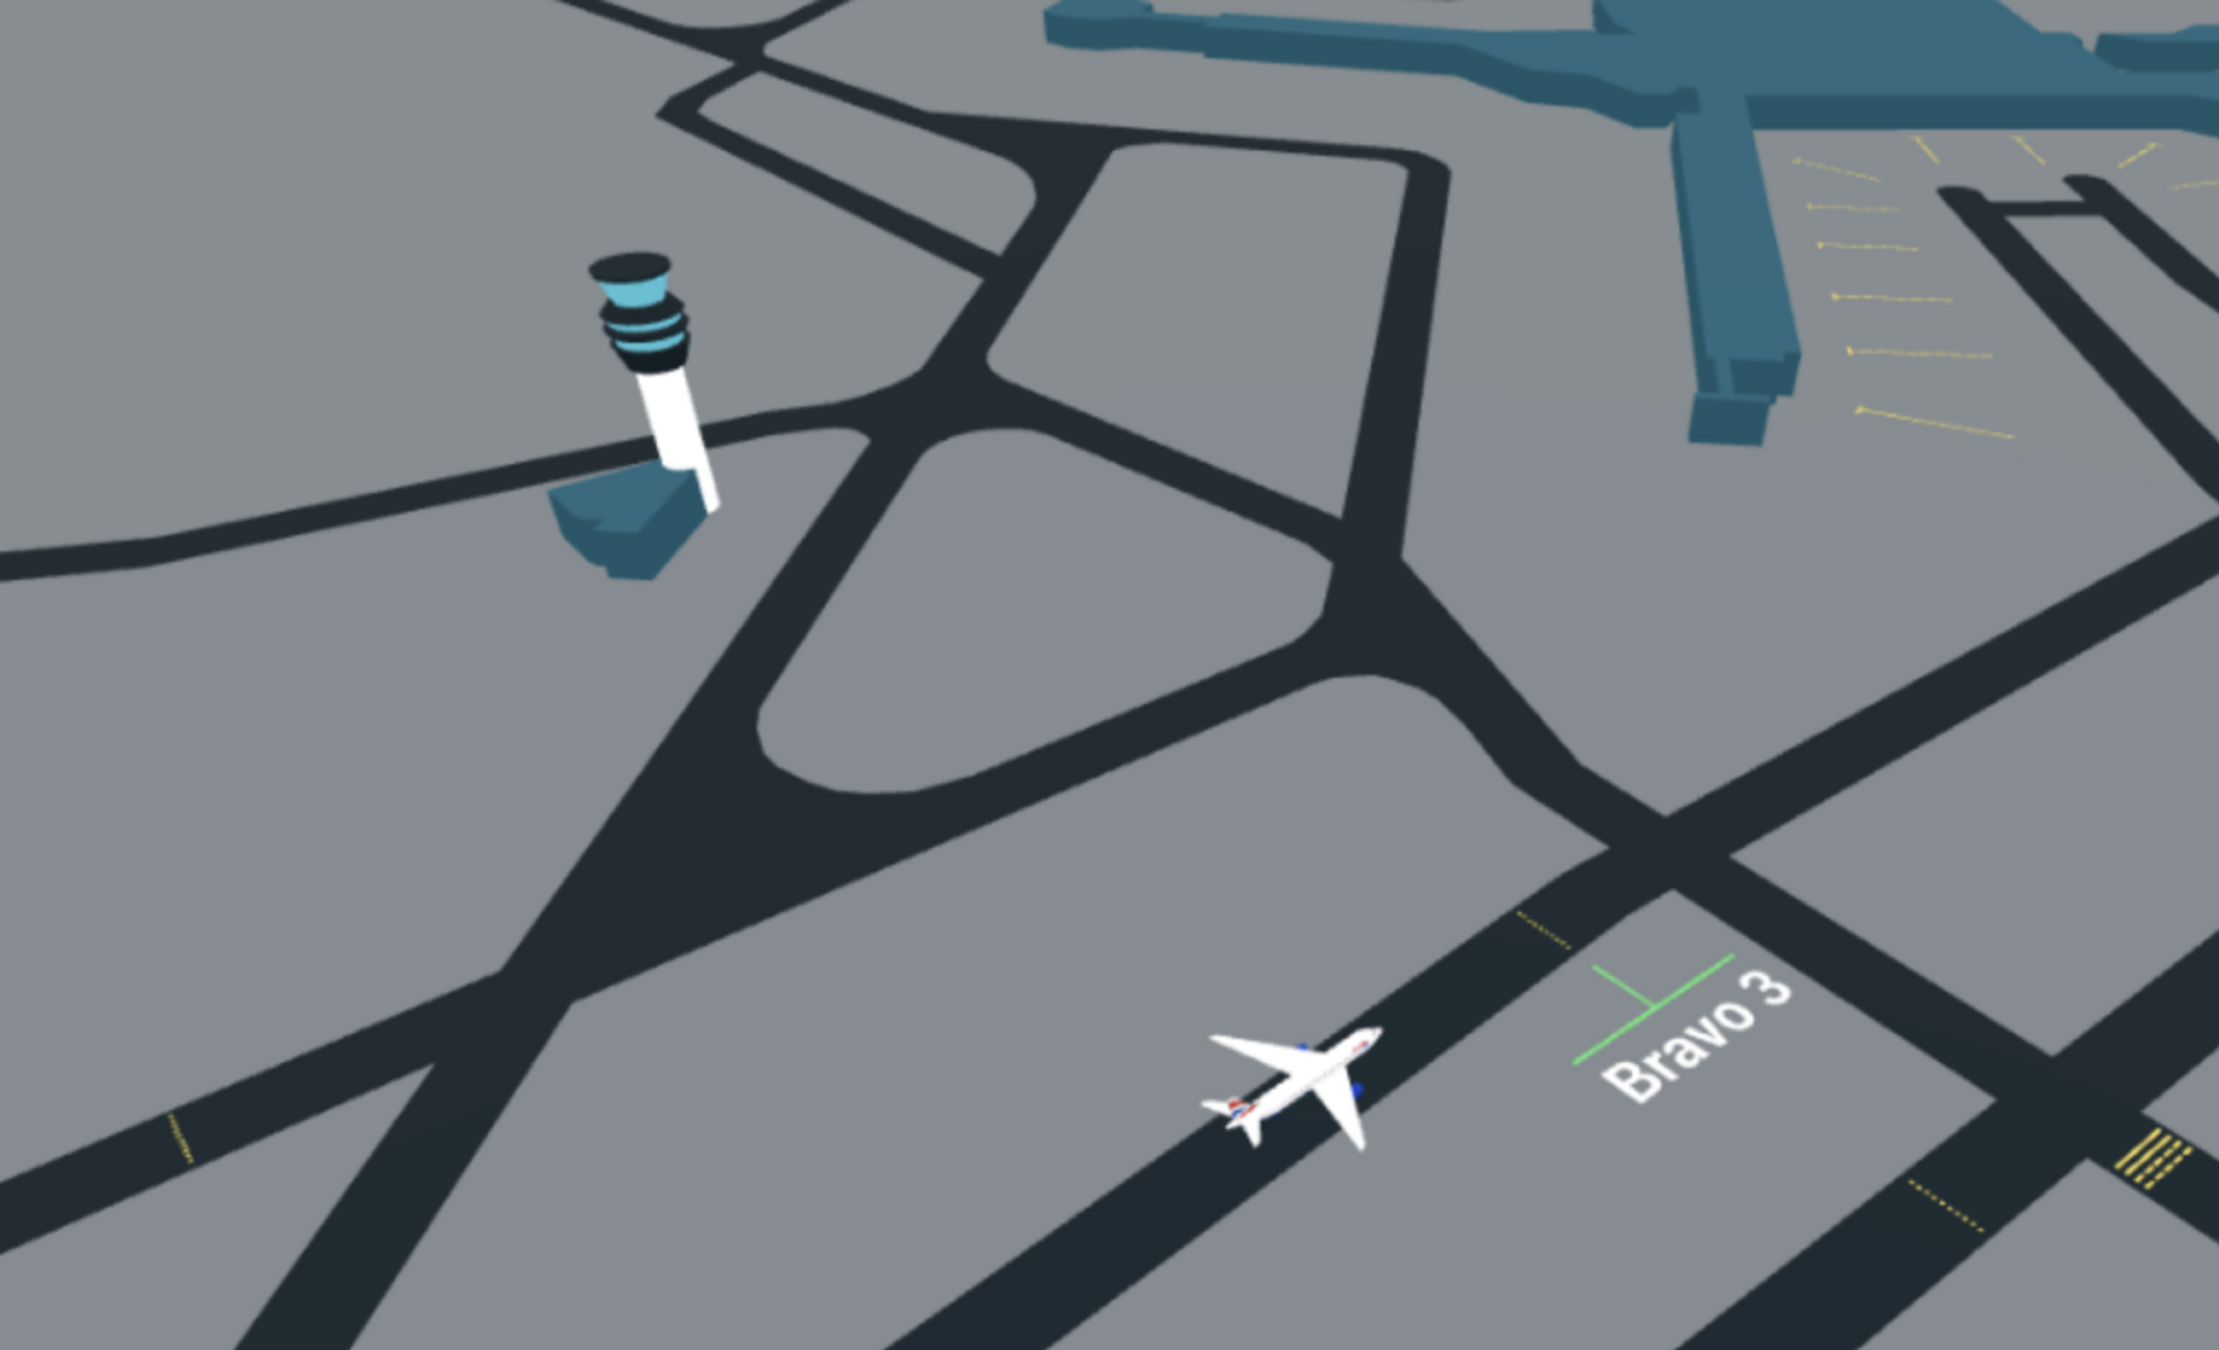 A flat colour map of an airport with a 3D air traffic controller sticking up out of it. A 3D plane is cruising along one of the runways next to the text 'Bravo 3'.